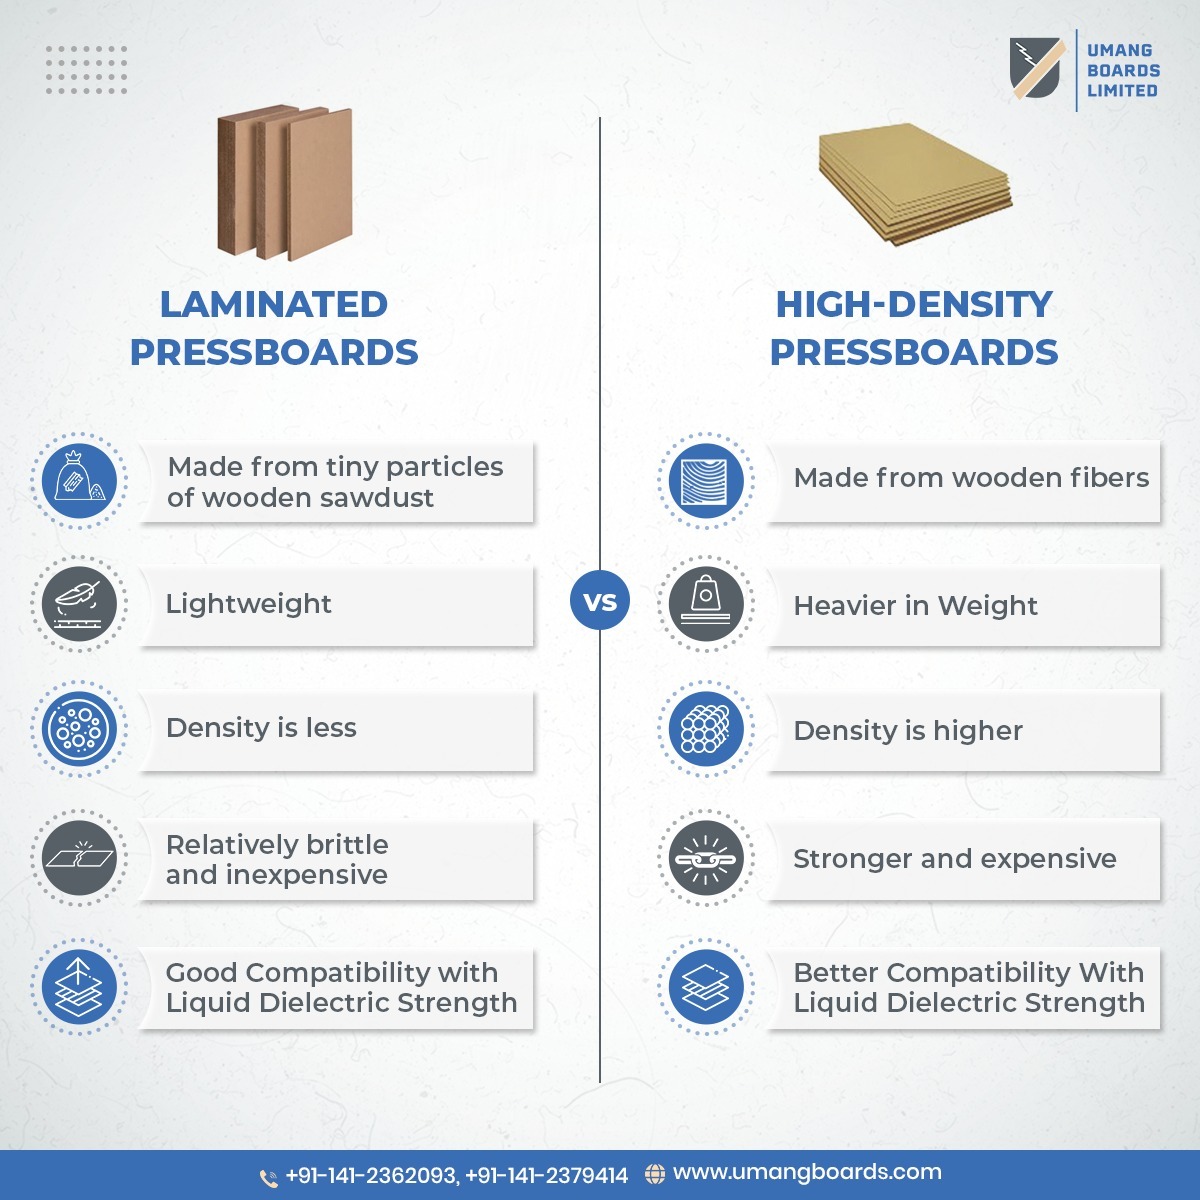 Here is the difference between laminated and high-density pressboards⬆️
.
Choose which one strengthens and fits appropriately per your product's characteristics! ⚡
#umangboards #celluloseinsulation #insulationpaper #laminatedpressboards #highdensitypressboards